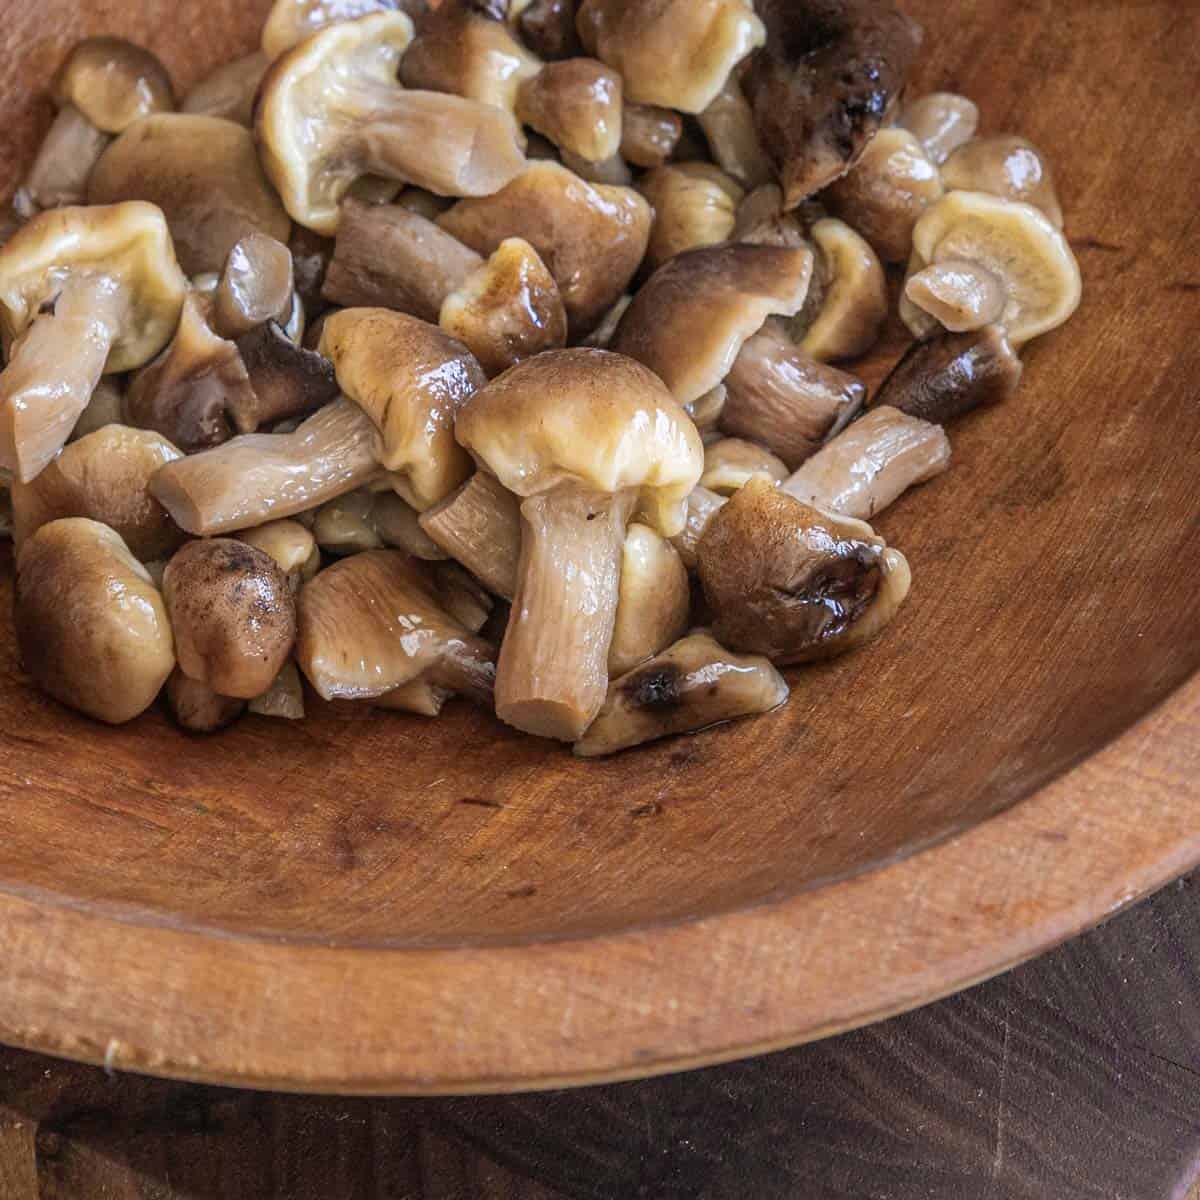 close up of cooked honey mushrooms in a wooden bowl.